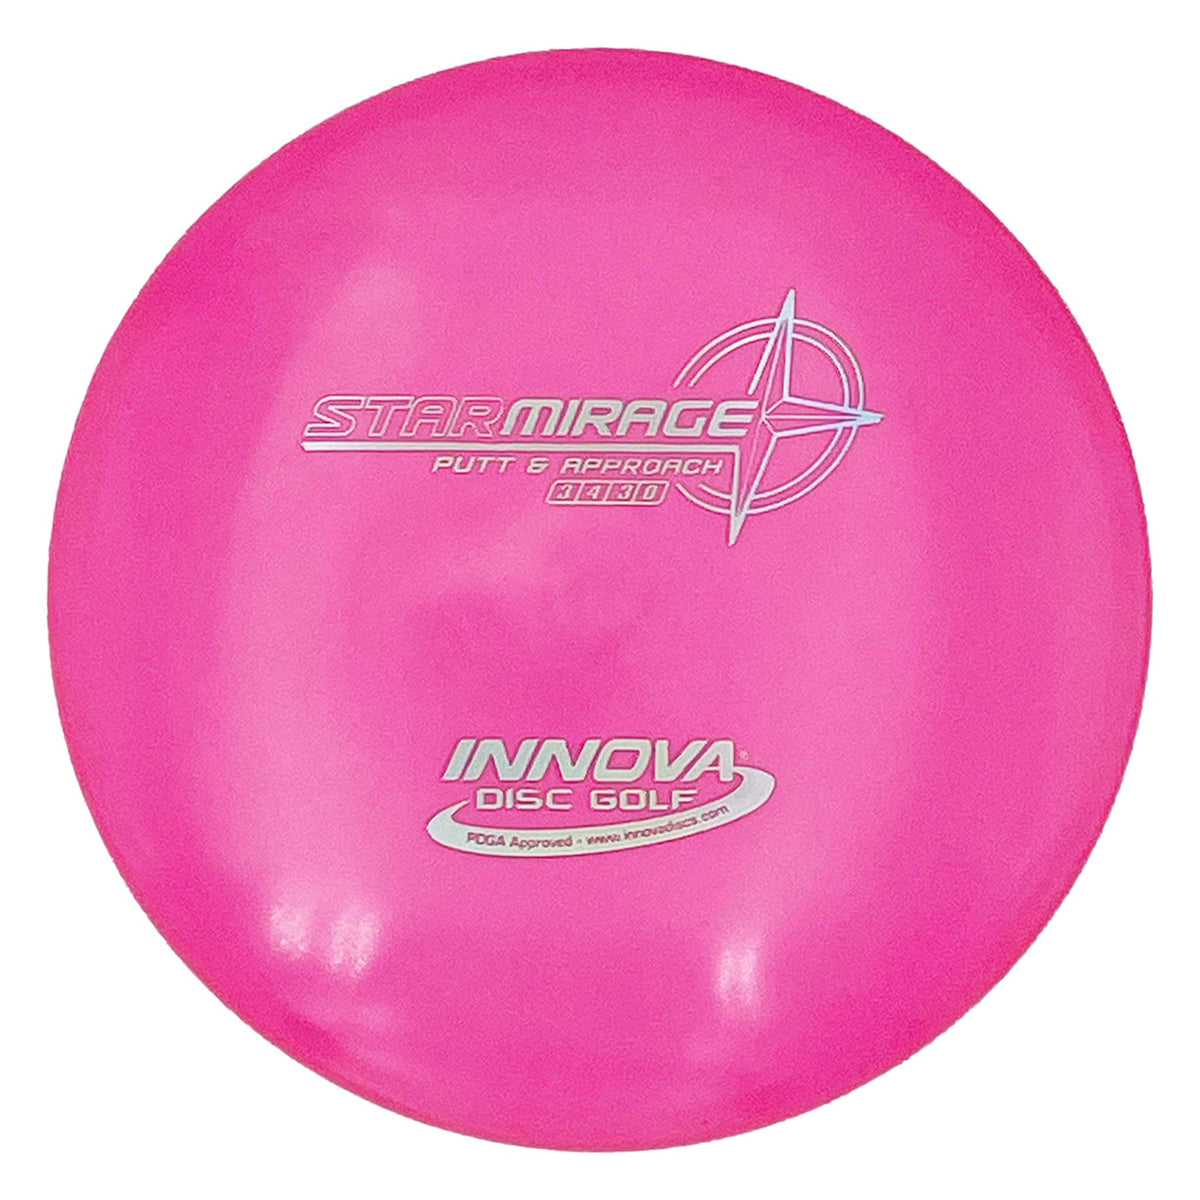 Innova Star Mirage putter and approach - Pink